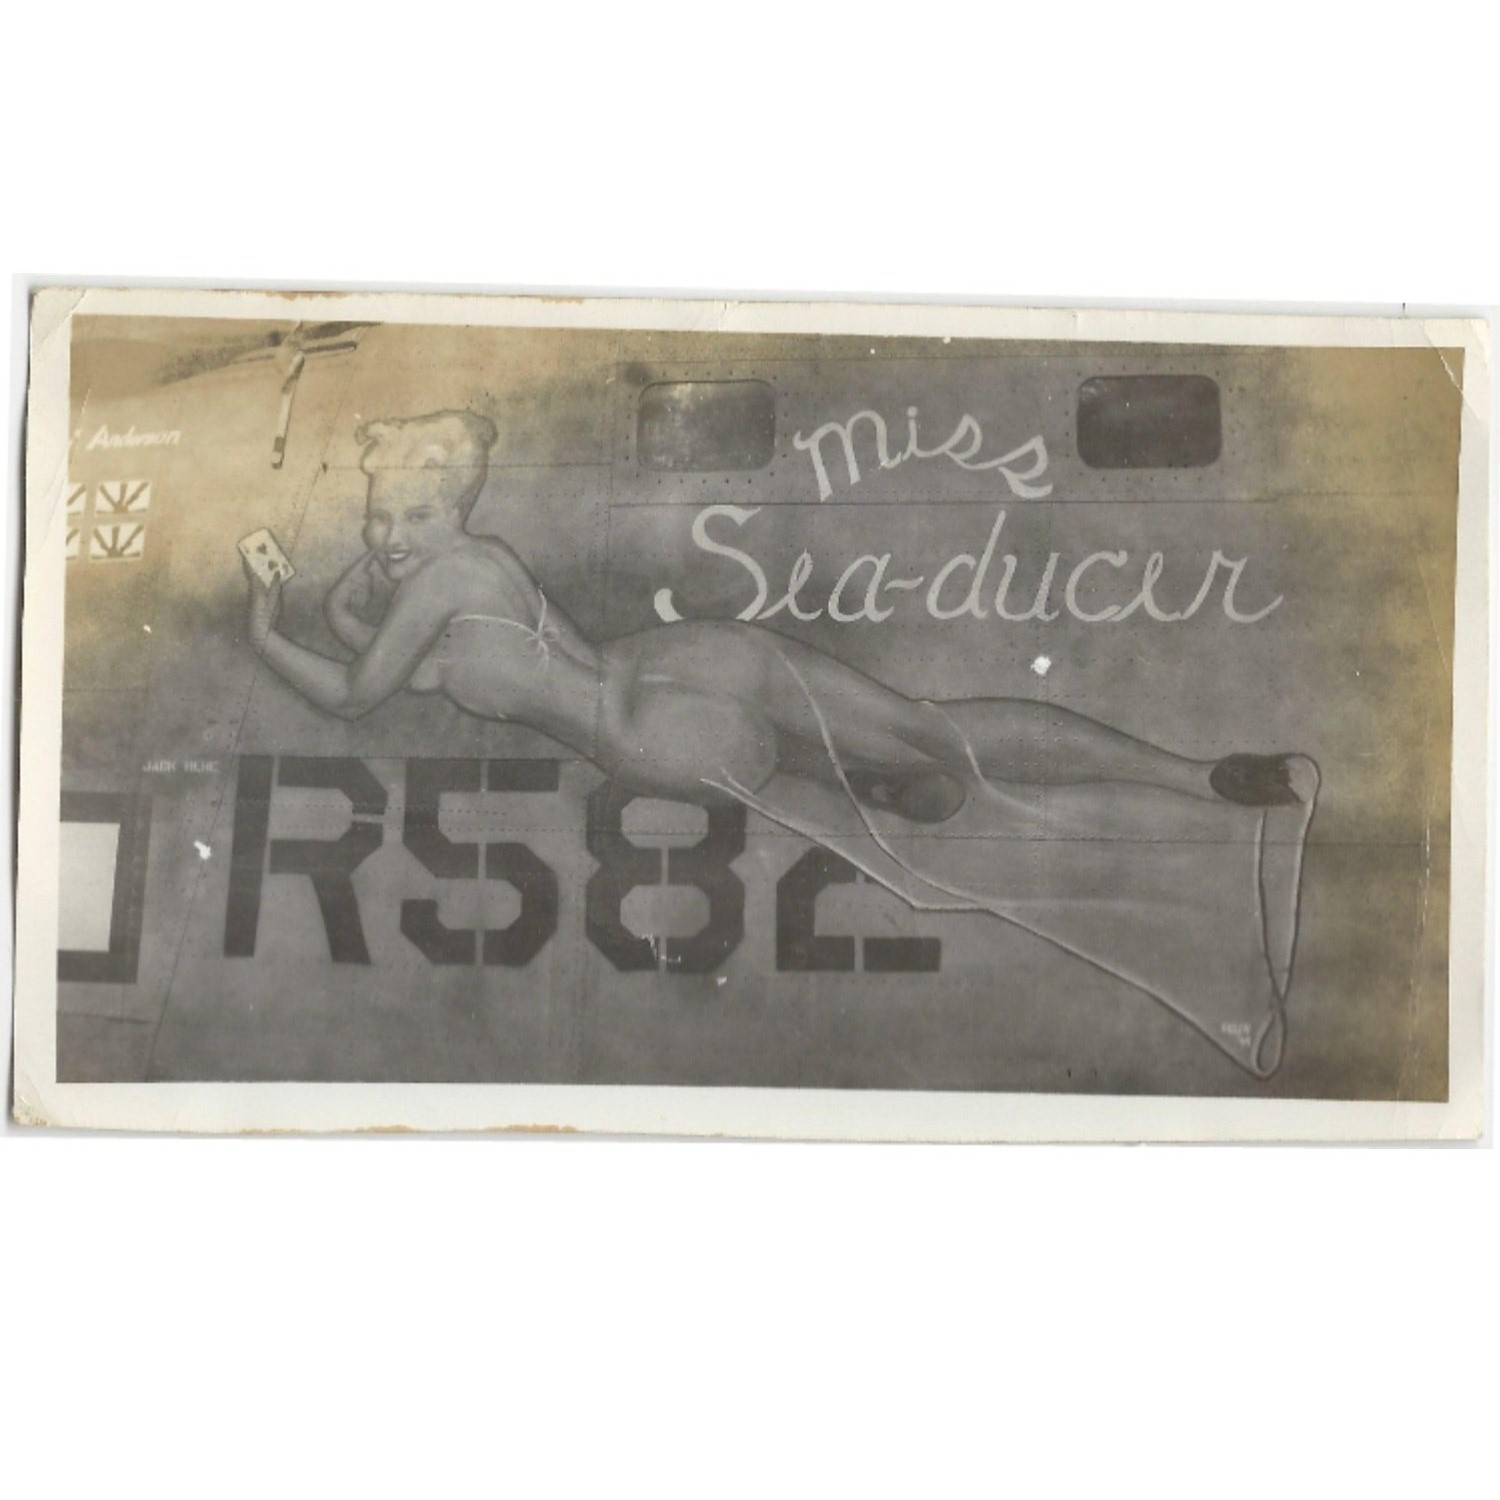 Photograph of VPB-116 PB4Y-2 Miss Sea-Ducer nose art